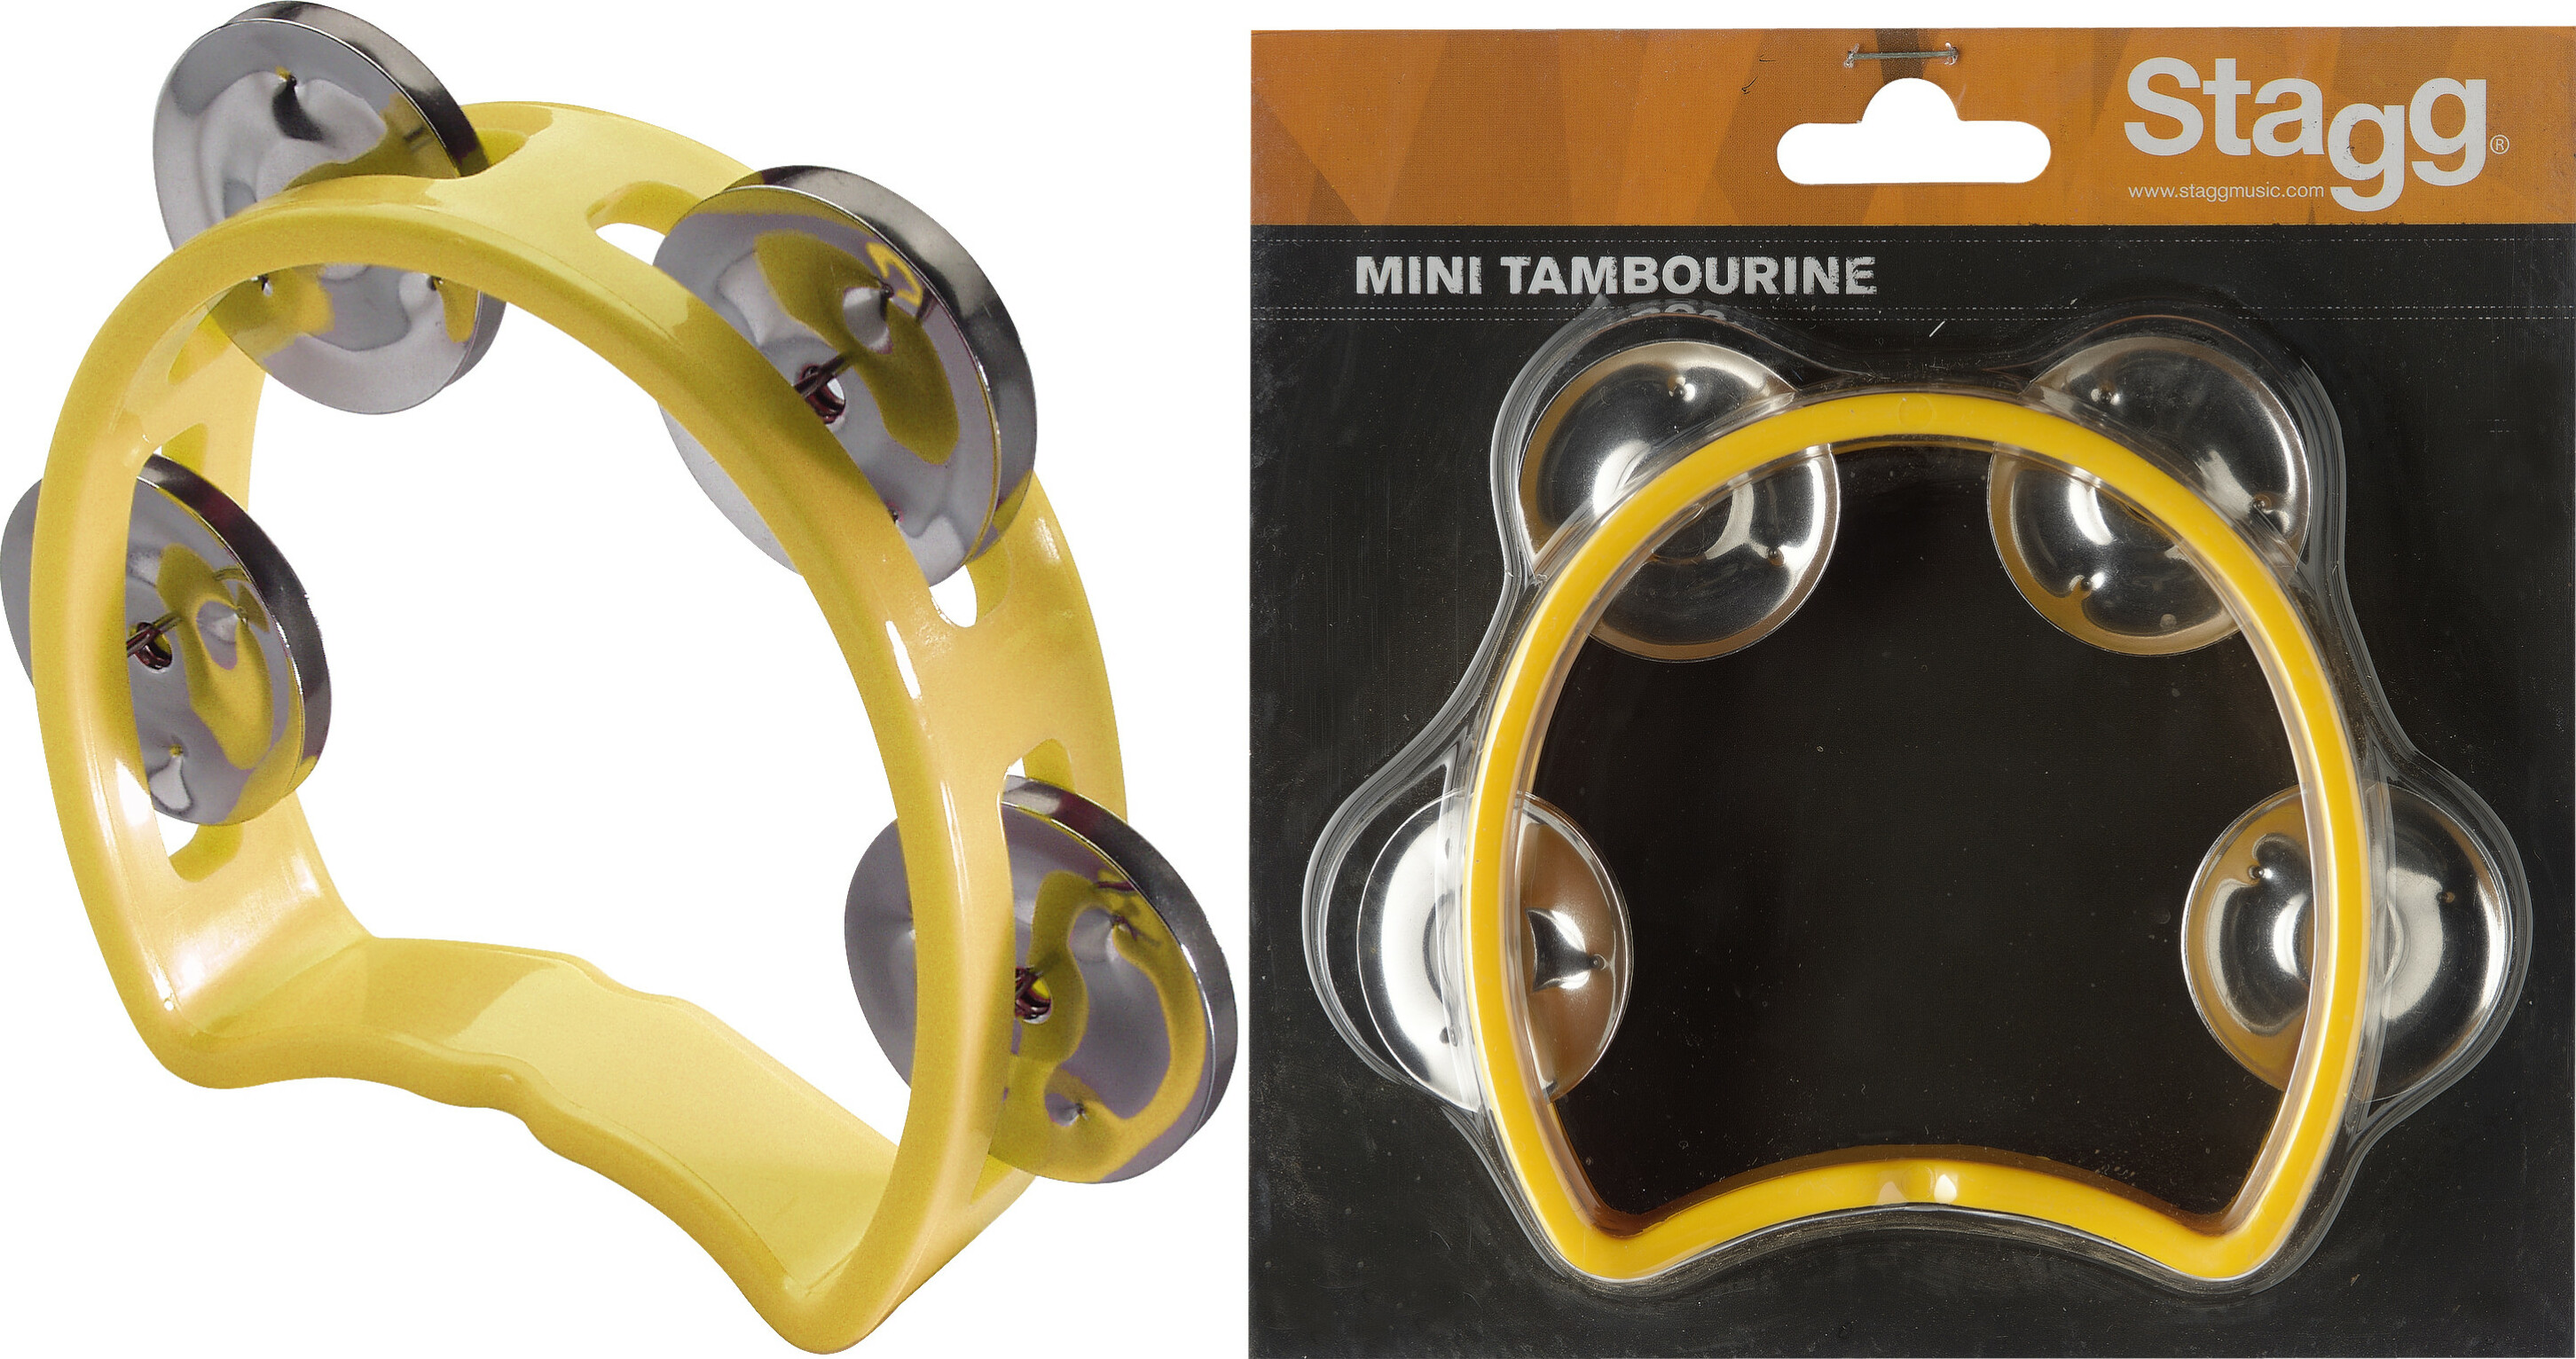 Stagg Tab-mini/yw Plastique 4 Cymbalettes Yellow - Shake percussion - Main picture